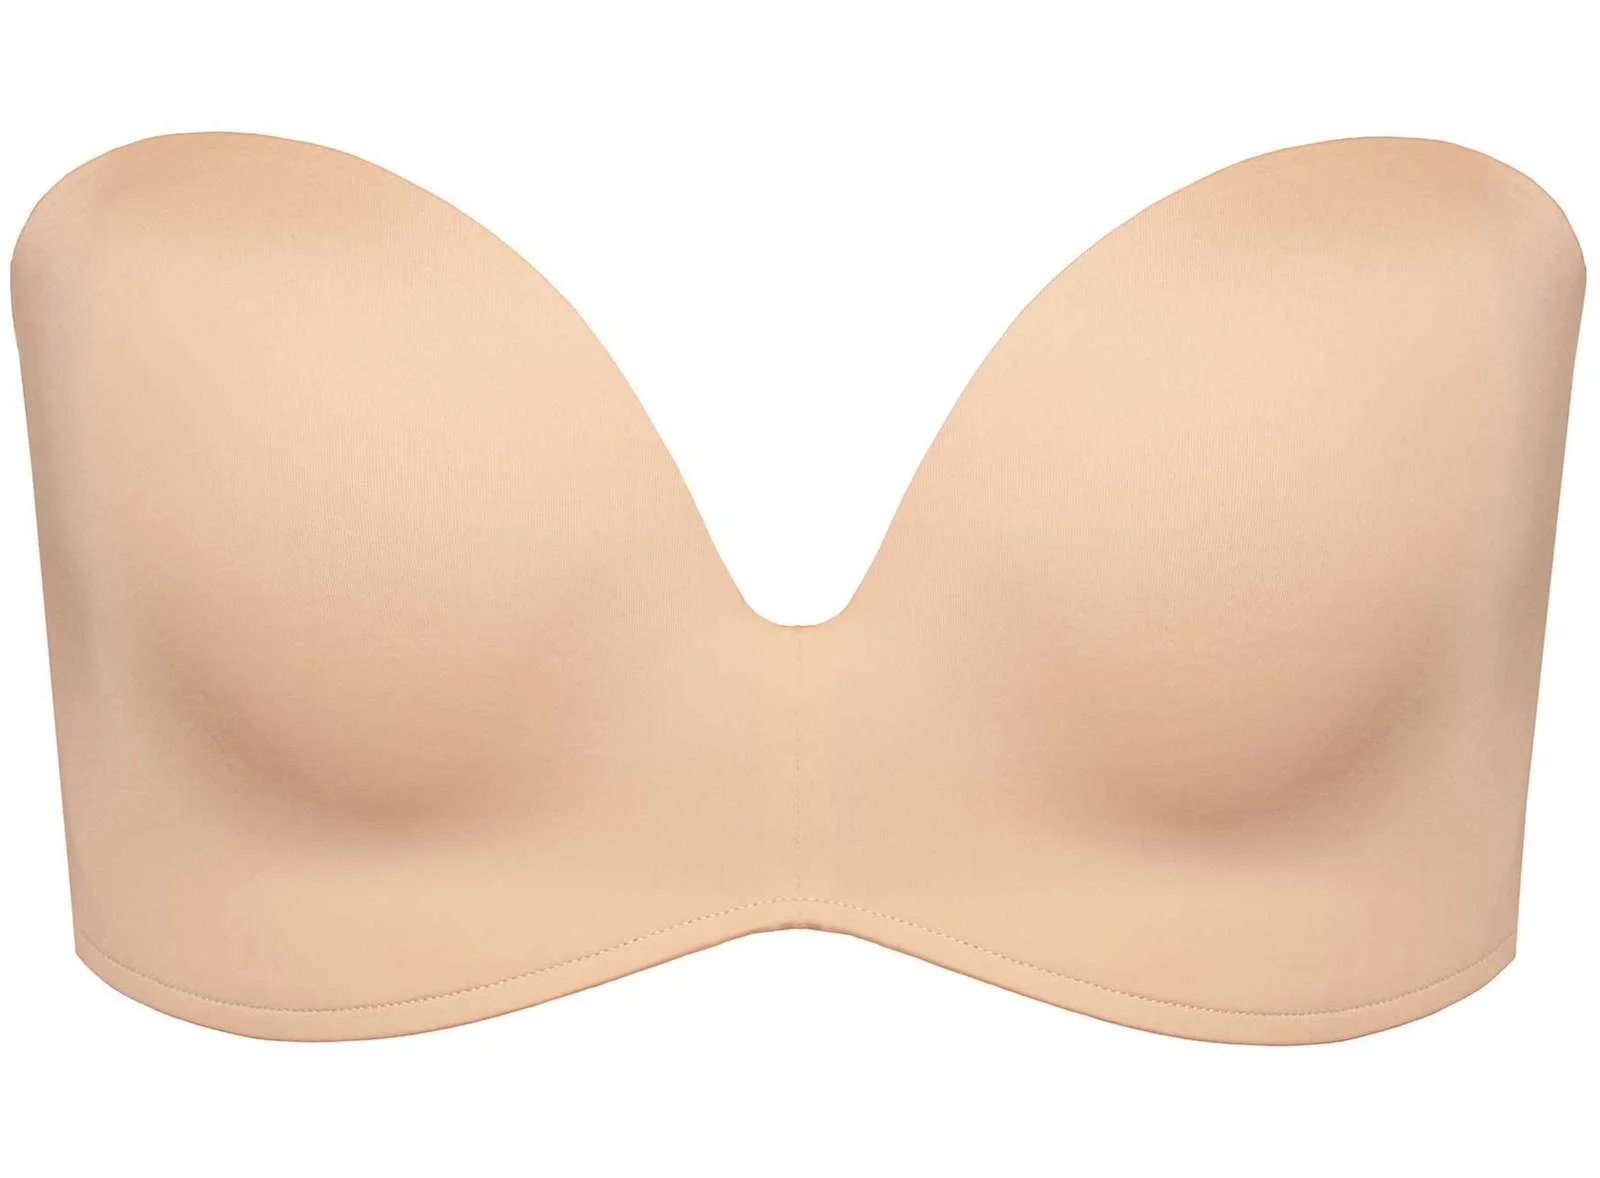 Trying On The Best Strapless Bras - Ruth Crilly